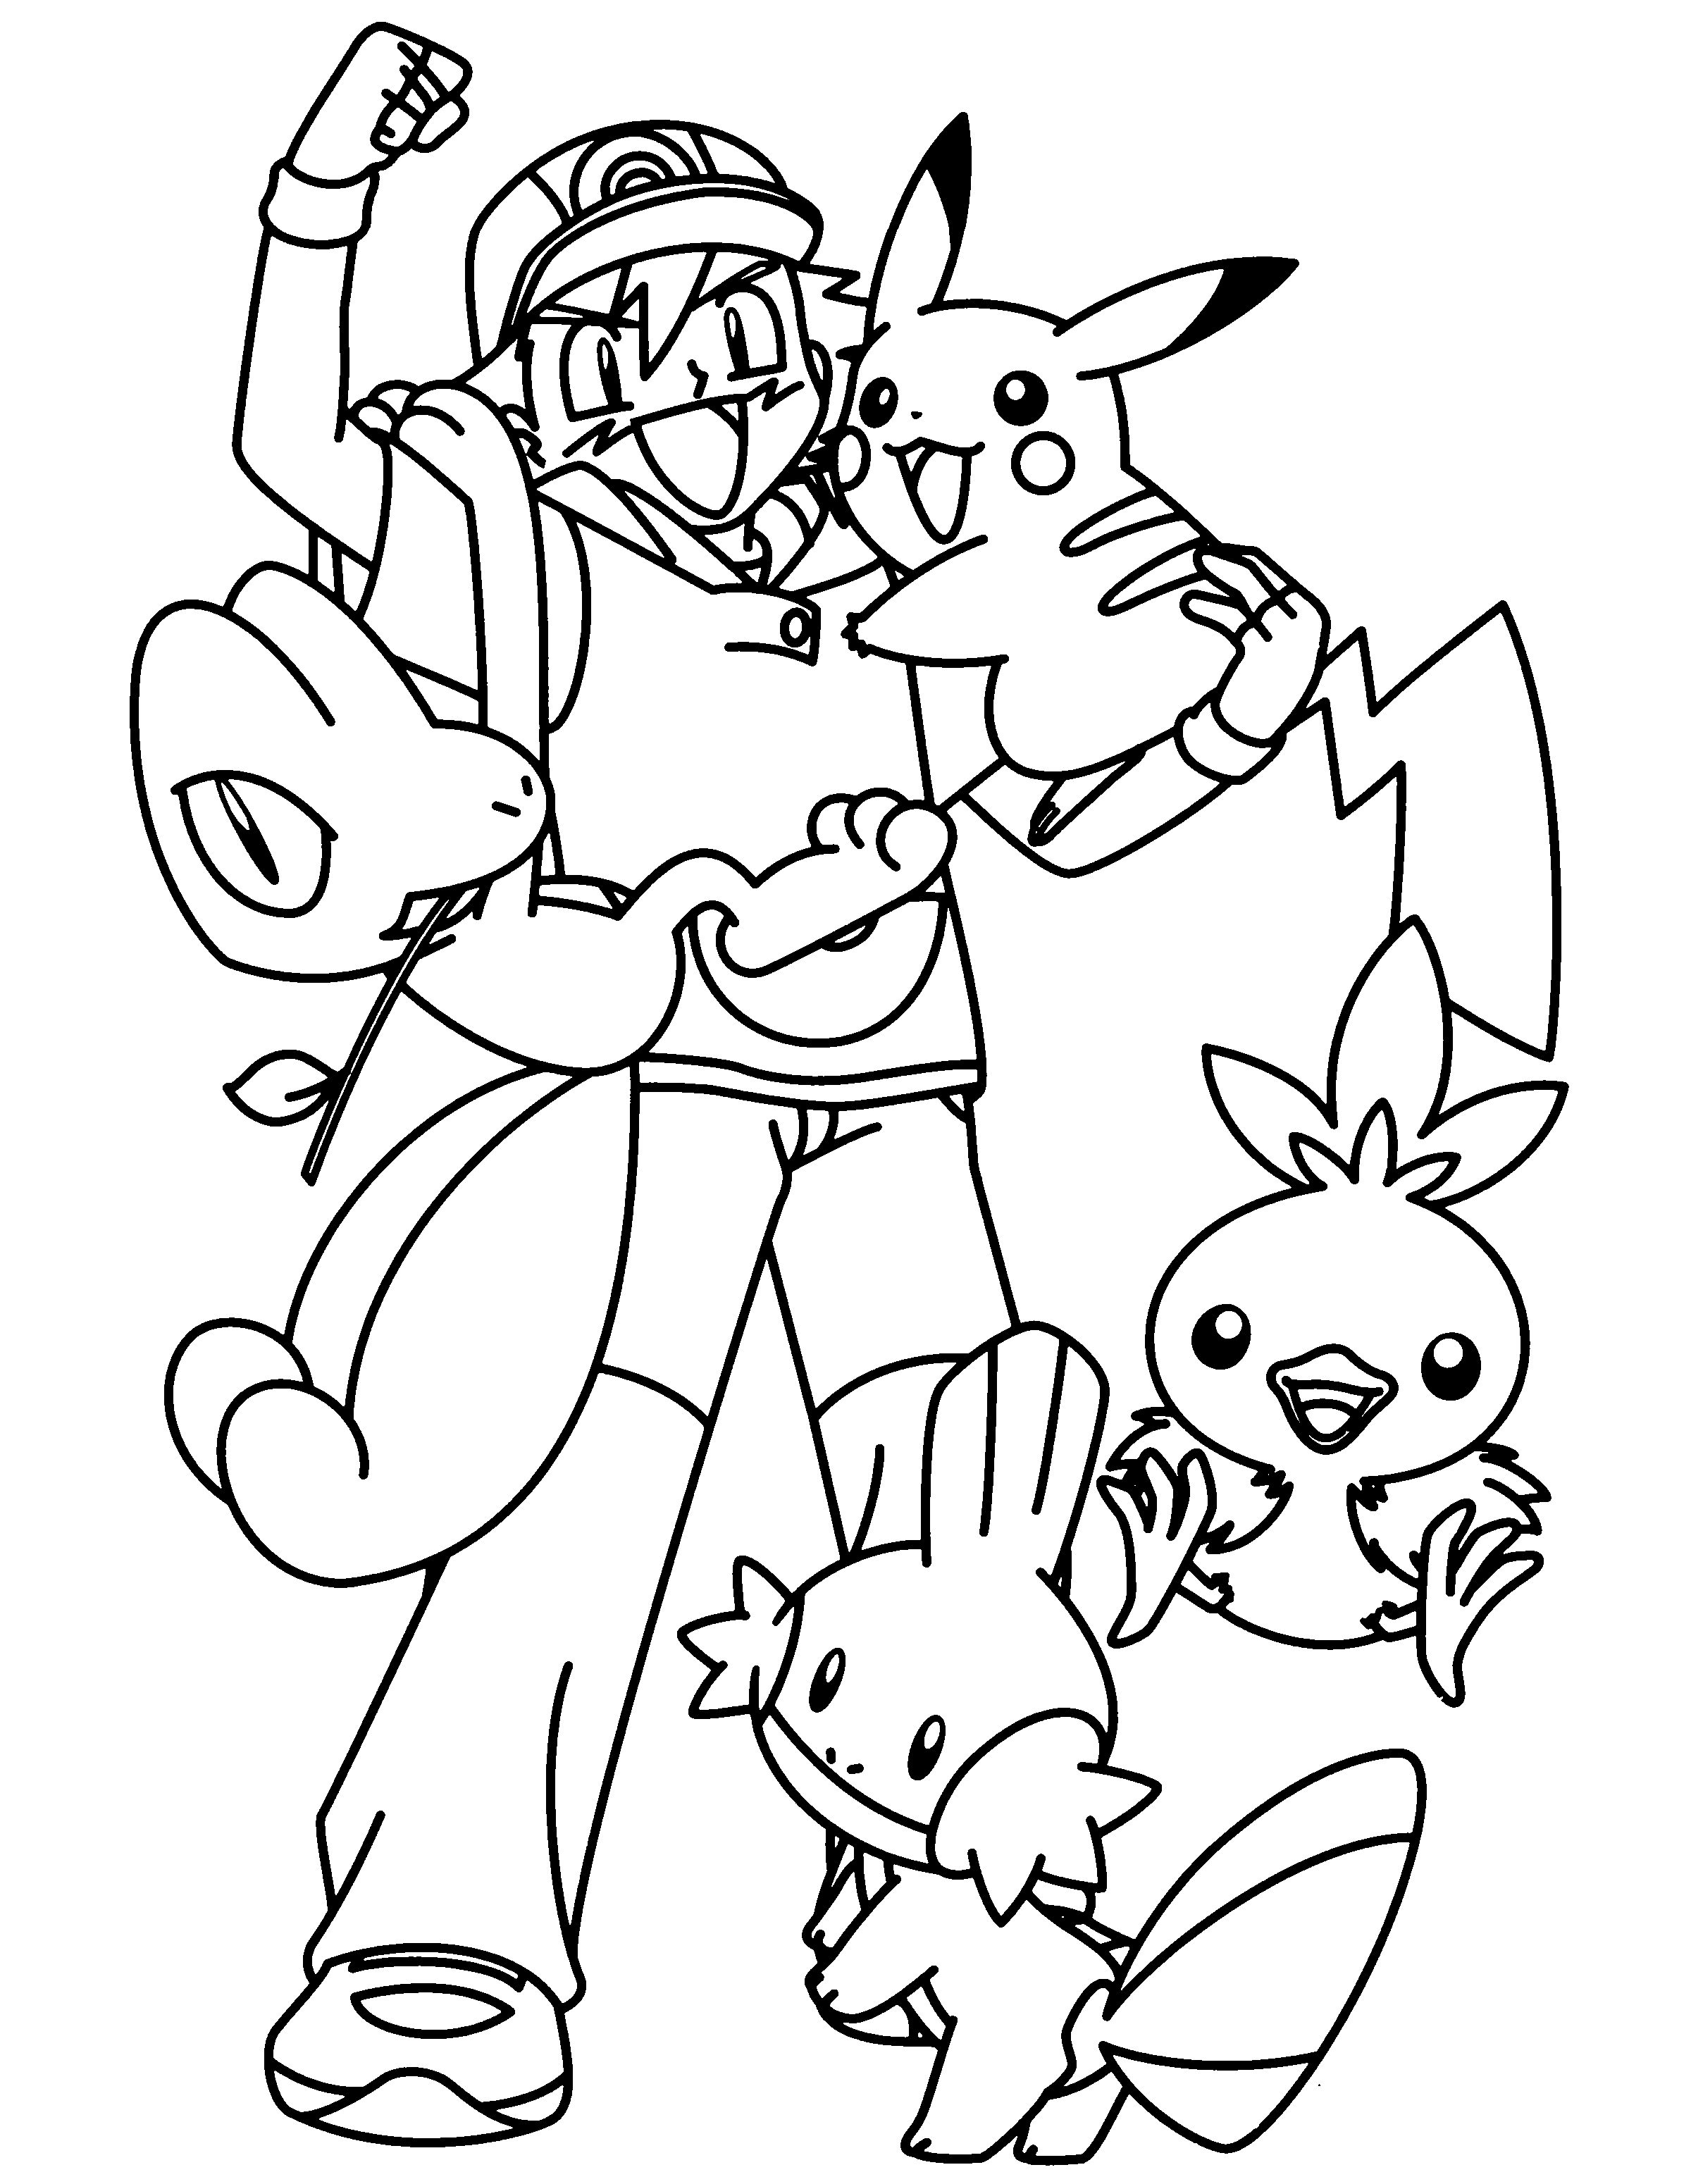 coloring-page-pokemon-advanced-coloring-pages-219